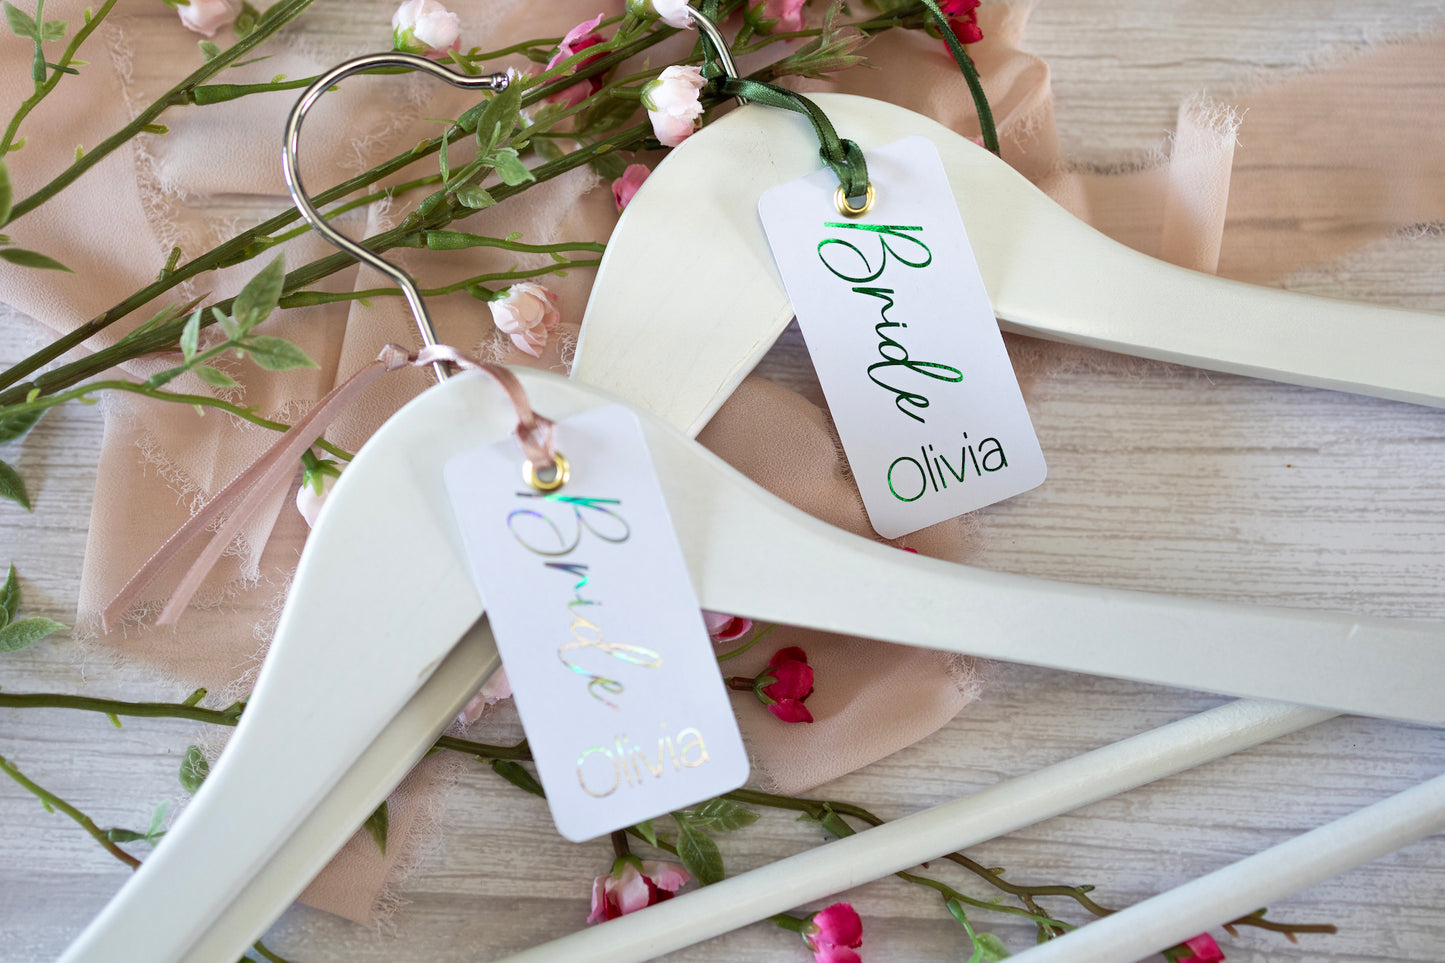 Hanger Tags for Wedding hangers, Personalised with real foil, Bridal Party Favours, Hanger Charm, Hanger Decal, Bridal Hangers